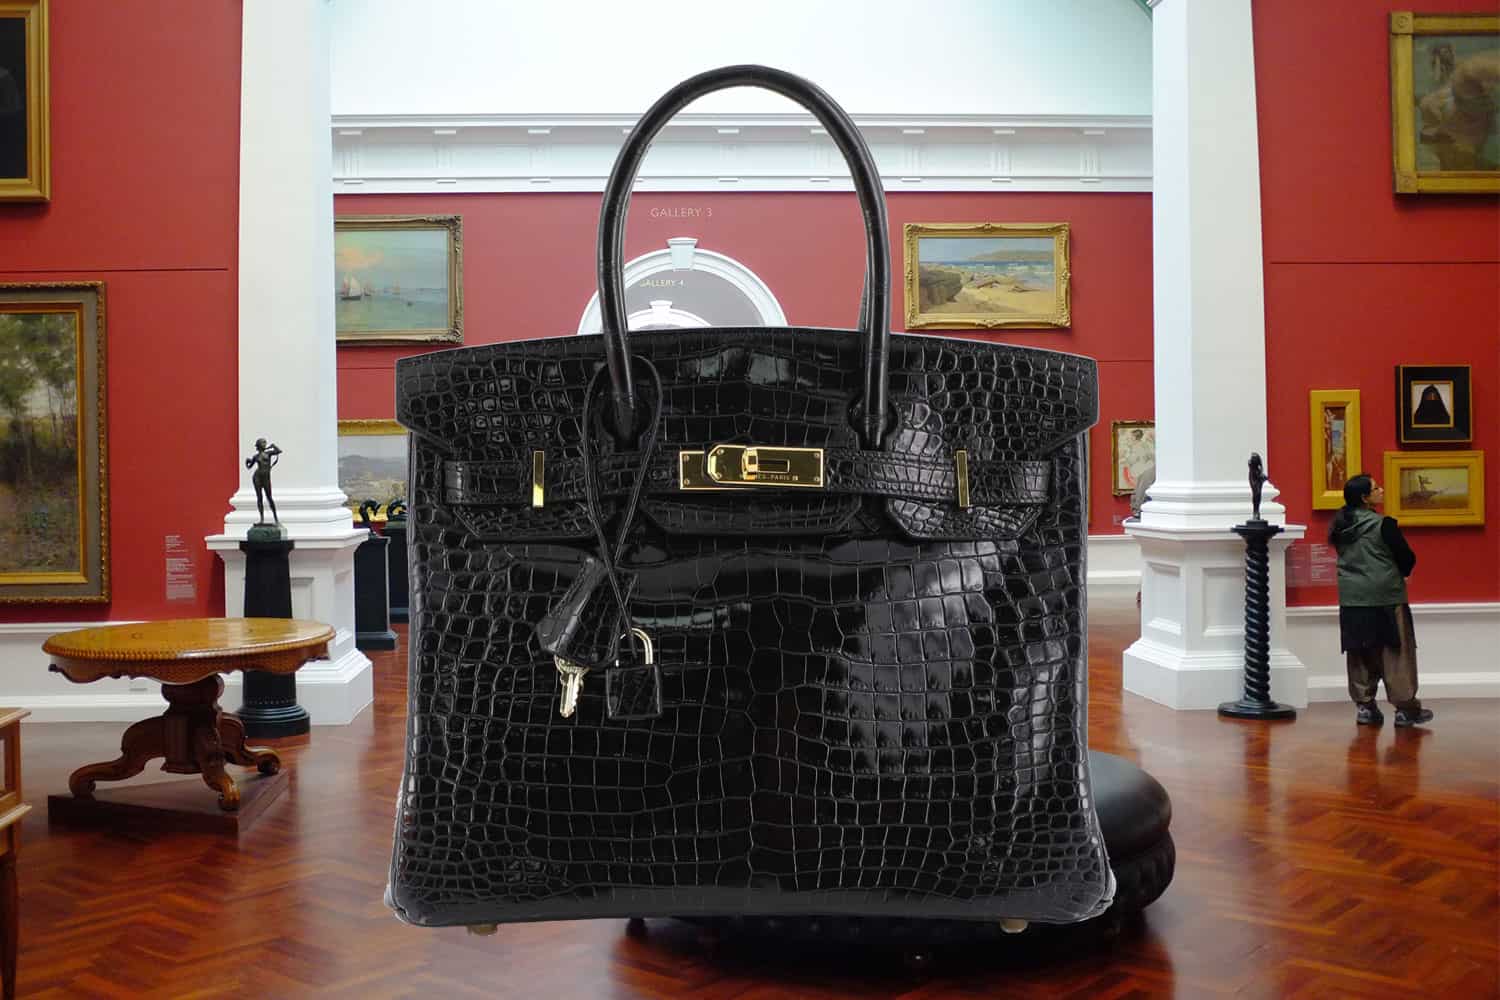 The Art of Luxury Handbags: Top 10 Iconic Bag Collaborations of All Time, MyArtBroker